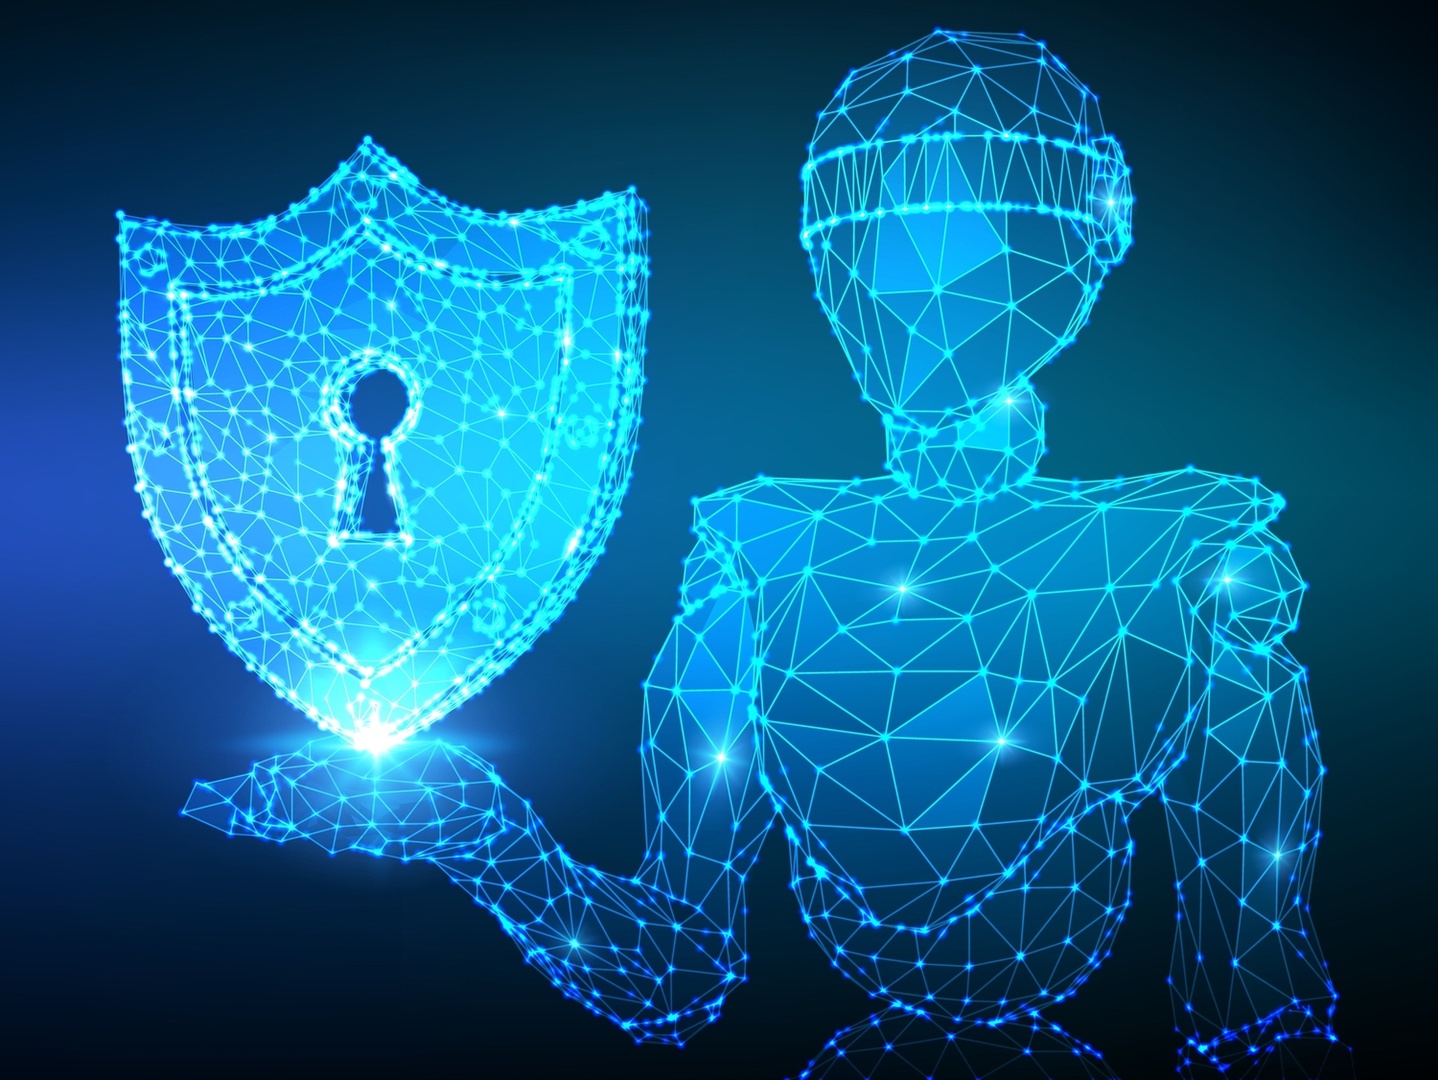 Gallery Image bigstock-Cyber-Security-Concept-Shield-314.max-1500x1500.jpg